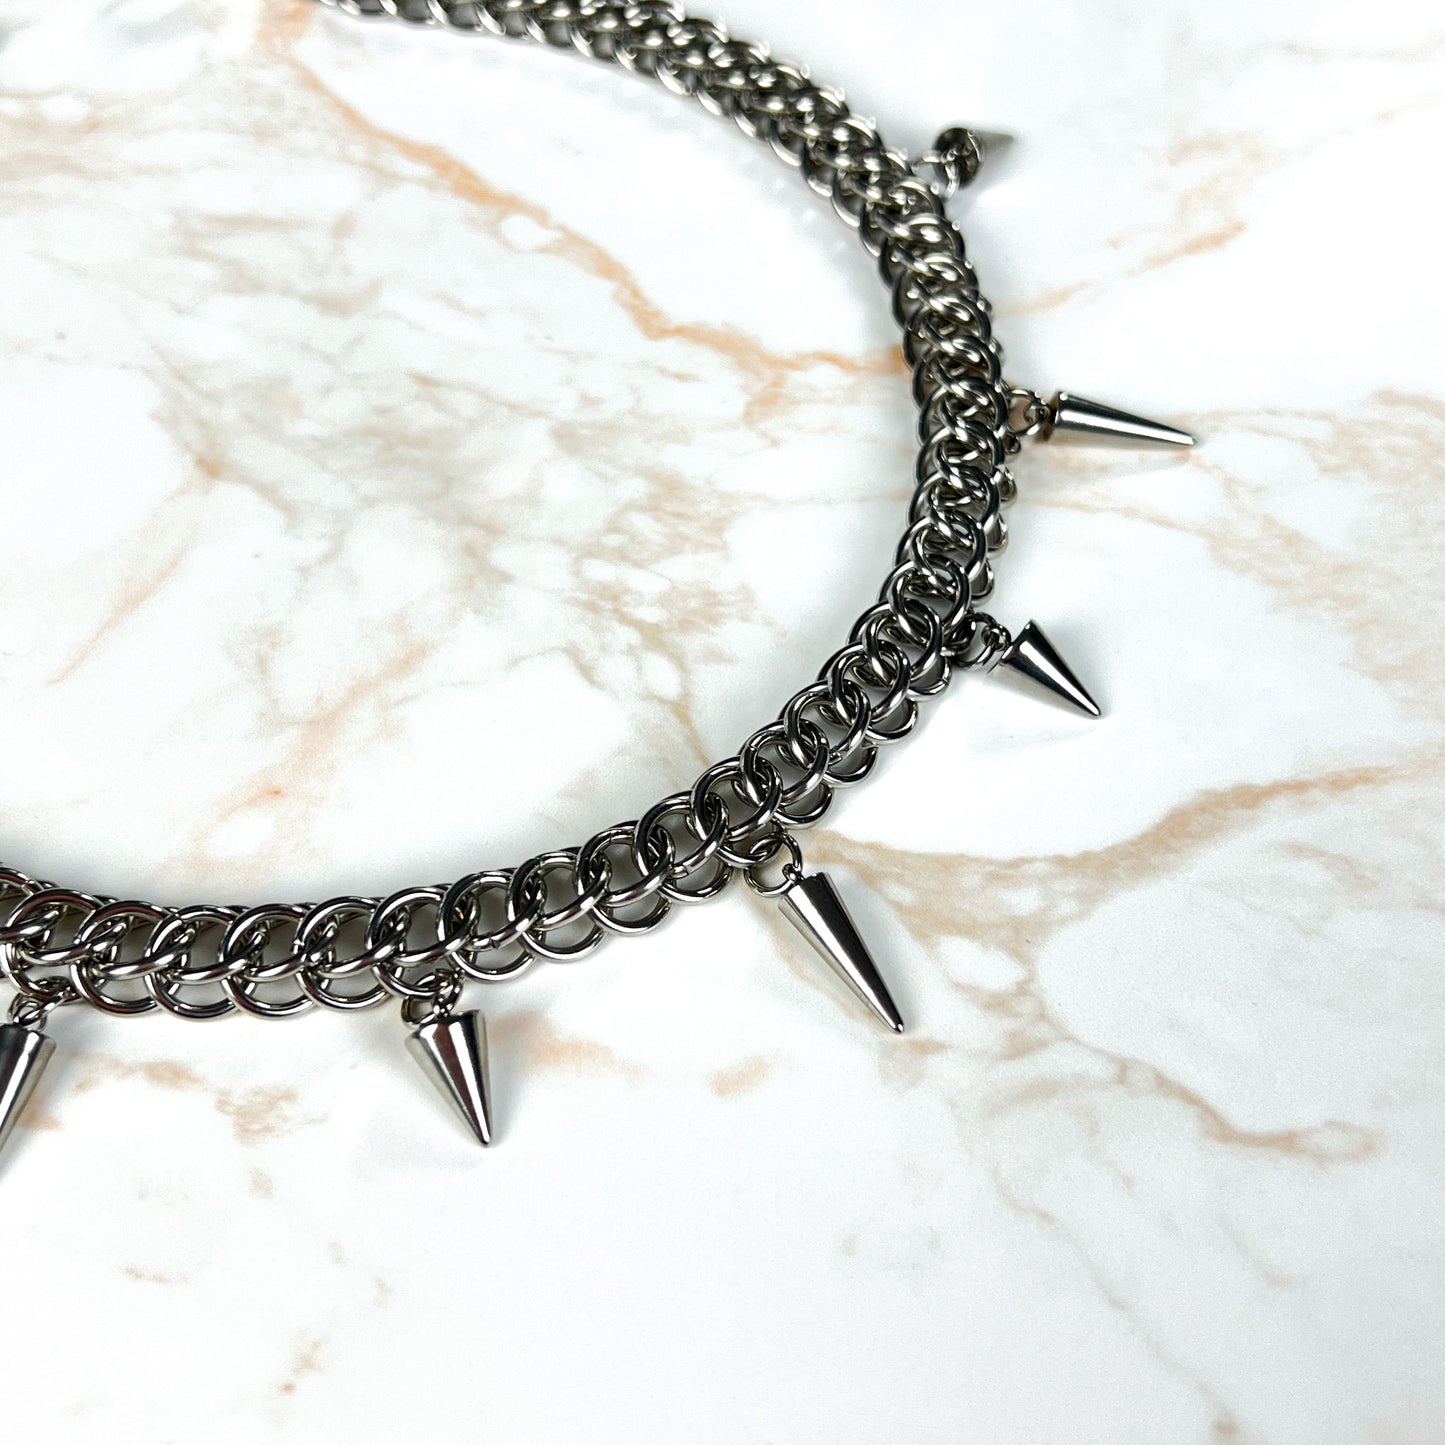 Half Persian chainmail choker with spikes, stainless steel gothic necklace Baguette Magick